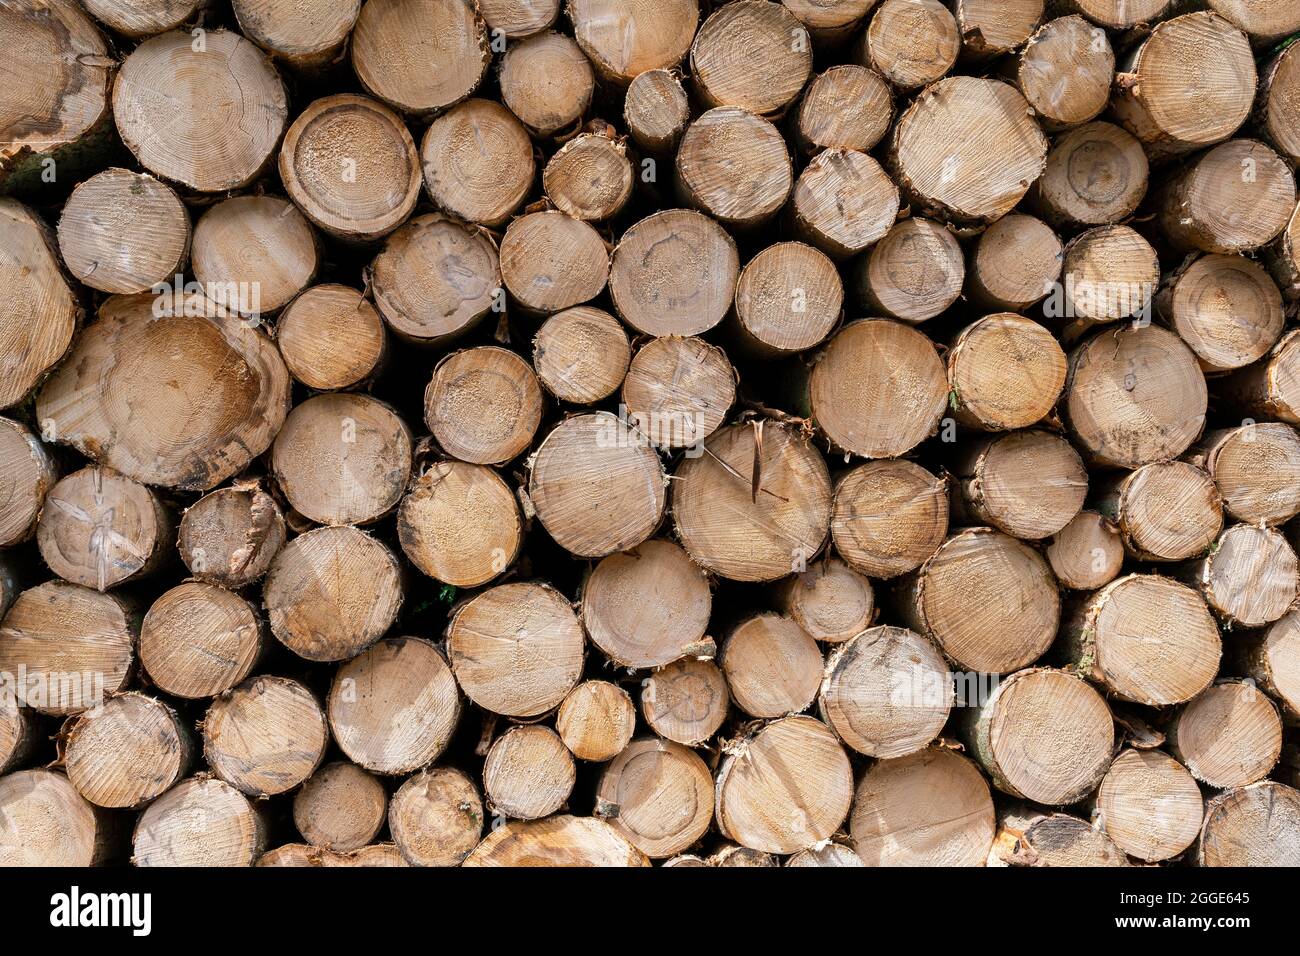 Timber industry, stacked logs, Baden-Wuerttemberg, Germany Stock Photo